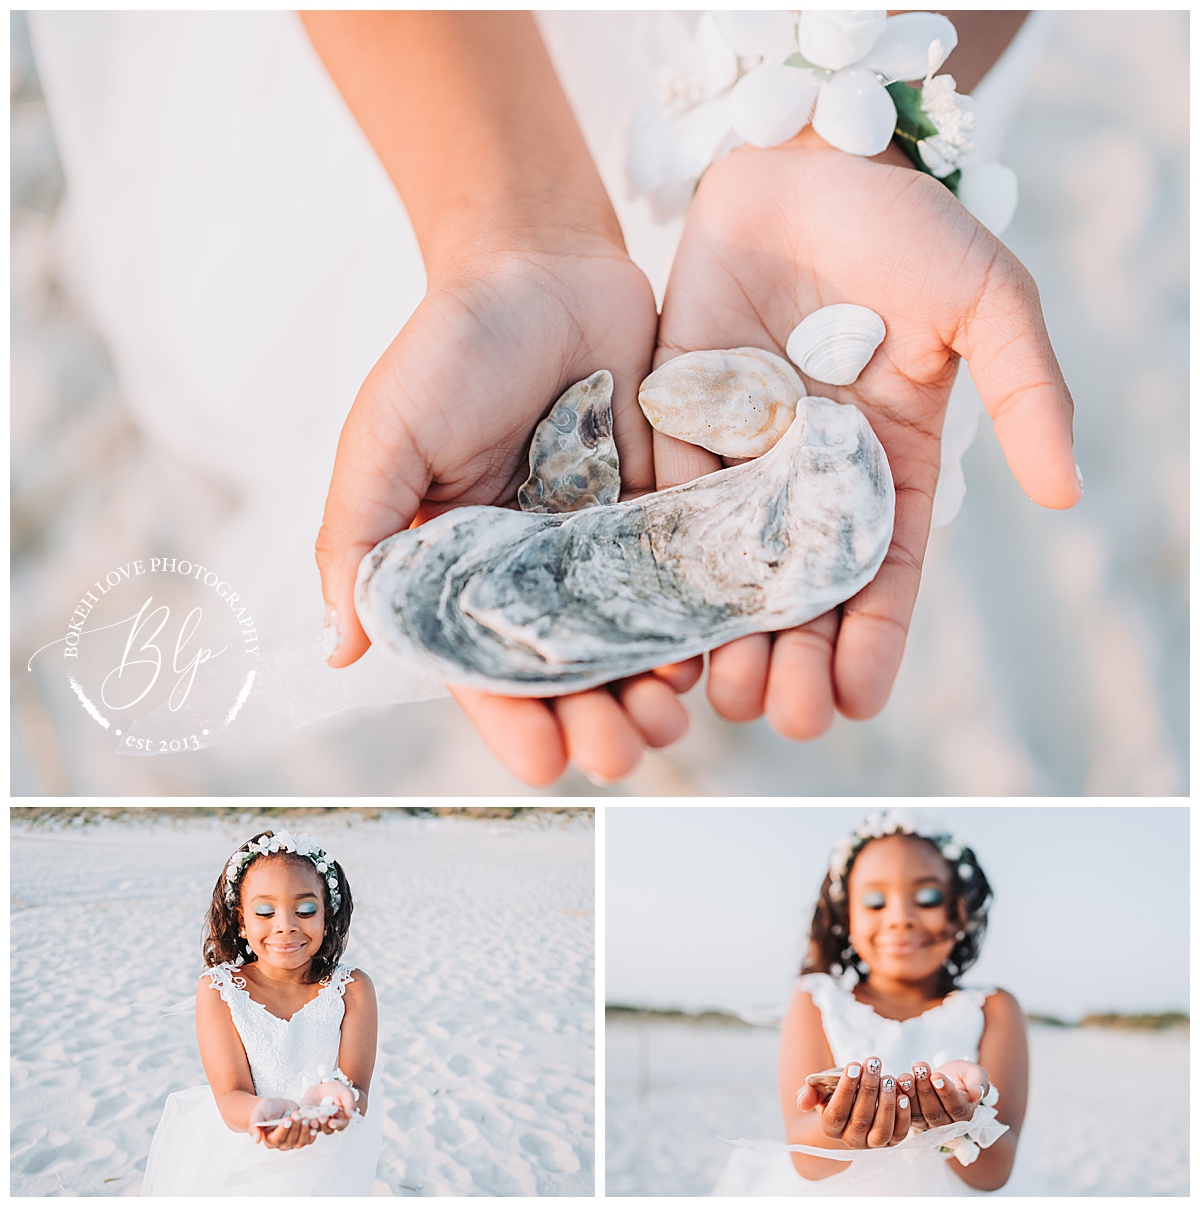 Bokeh Love Photography, Cape May Beach Portraits, Birthday Portraits in Cape May, South Jersey Family Photographer